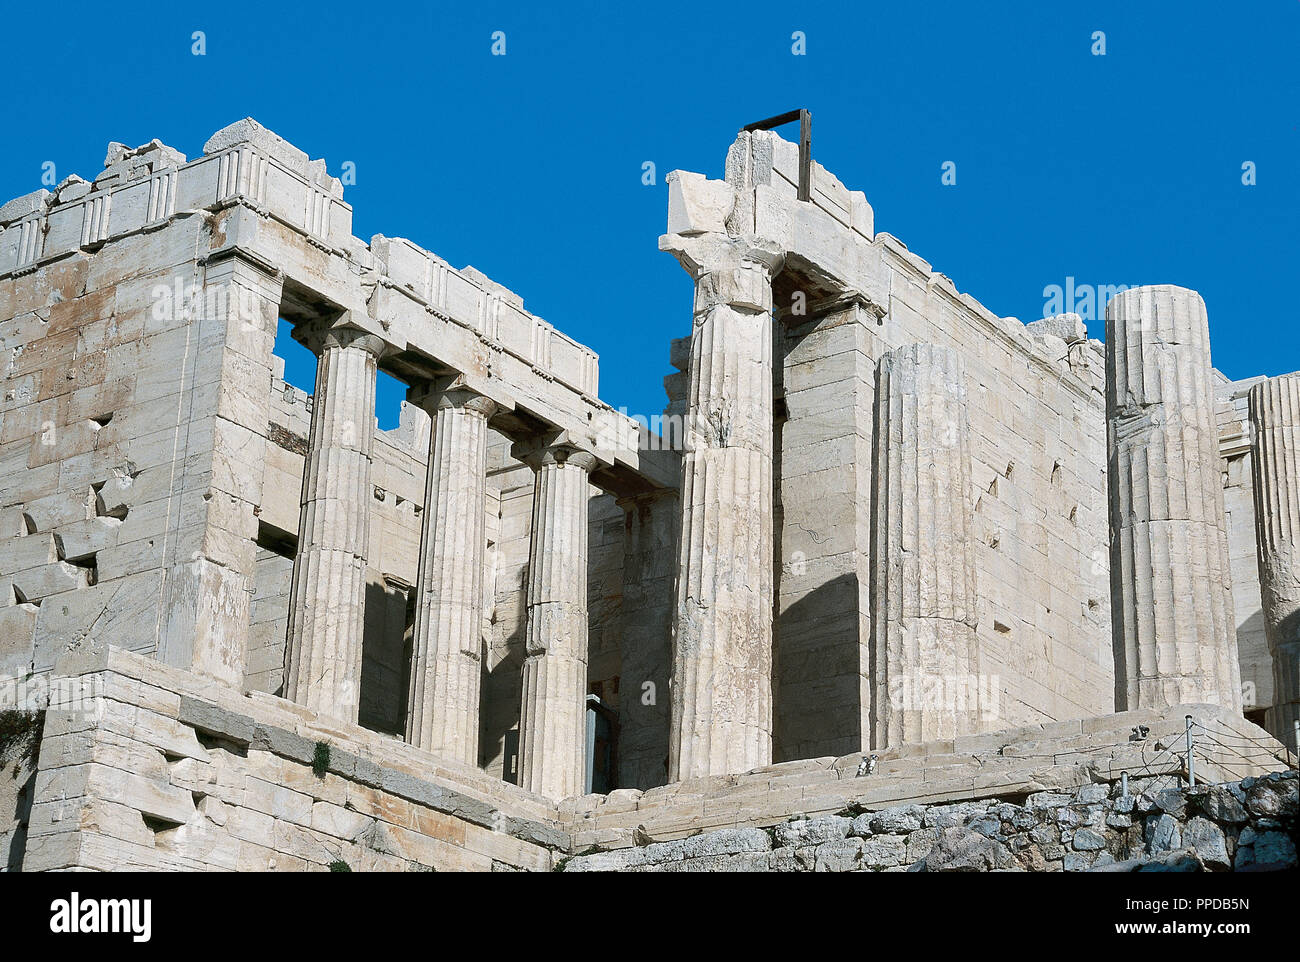 Greece. Athens. Propylaea. Monumental entrance to the sacred precinct of the Acropolis. Built between 437-432 B.C. by order of Pericles and according Mnesicles project. Stock Photo